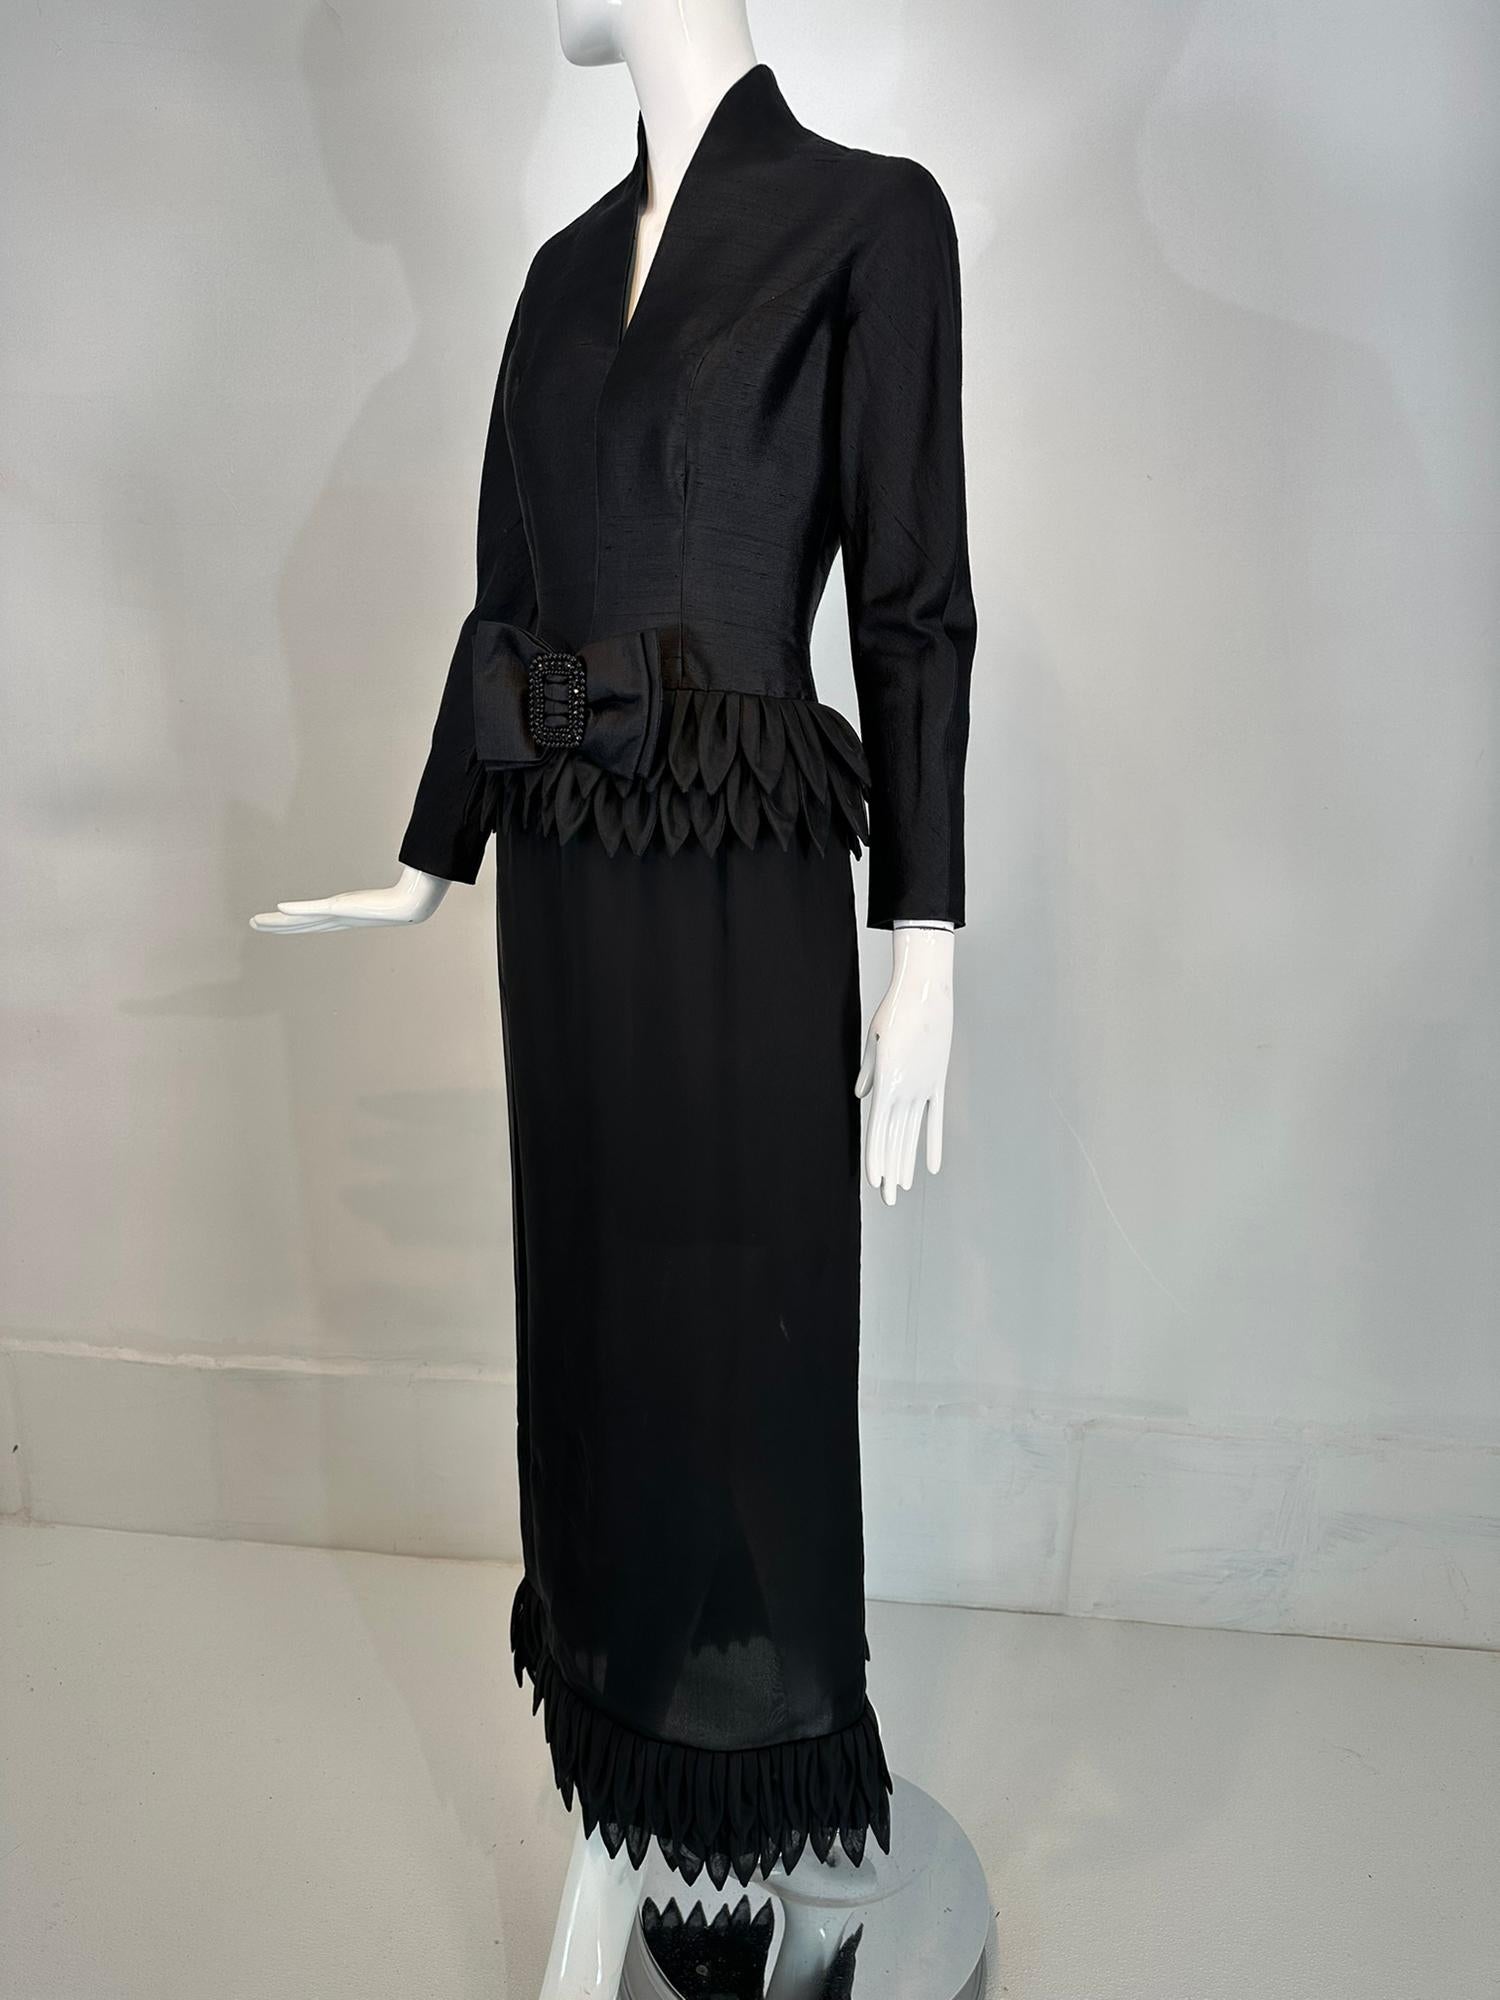 Vinchi Demi Couture Black Silk Hand Rolled Petal Evening Dress 1960s Hong Kong In Good Condition For Sale In West Palm Beach, FL